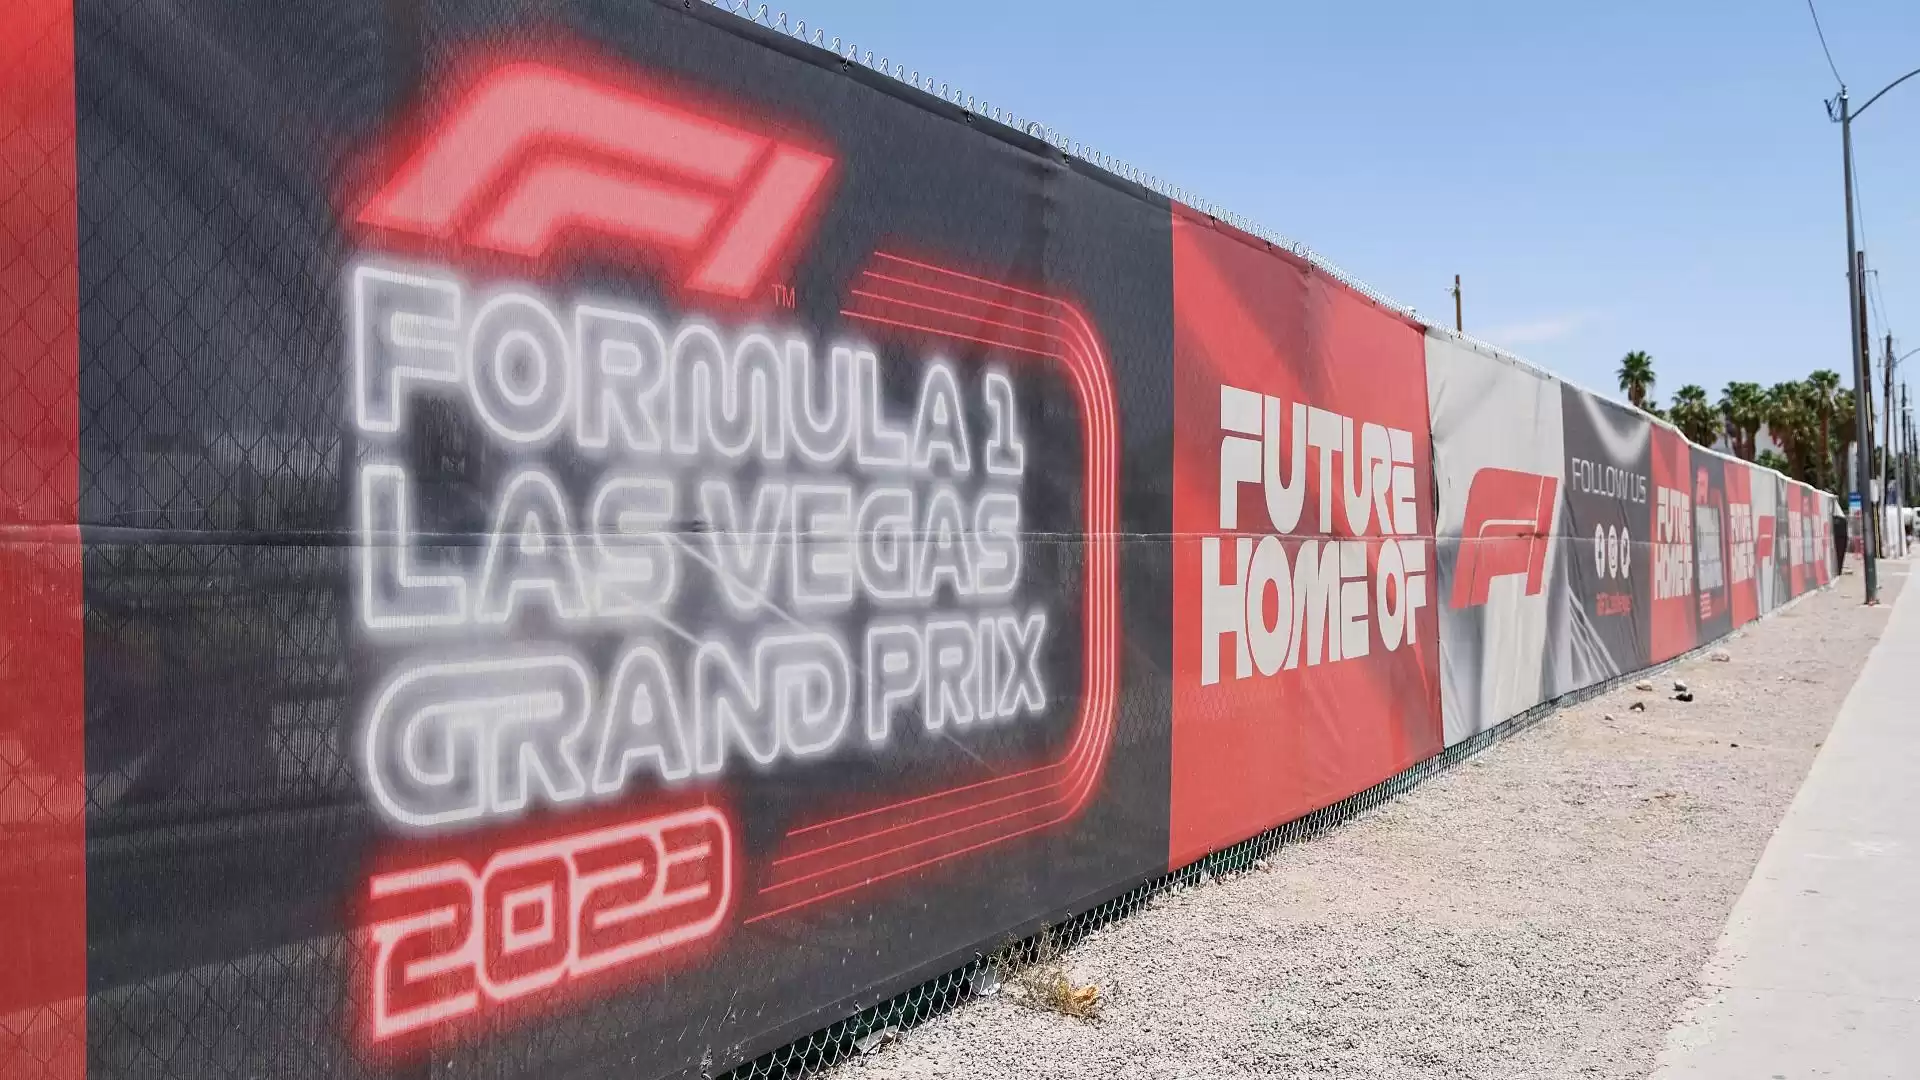 F1 Las Vegas Grand Prix: Late Start, FP1 Cancelled, Track Problems - Everything Wrong